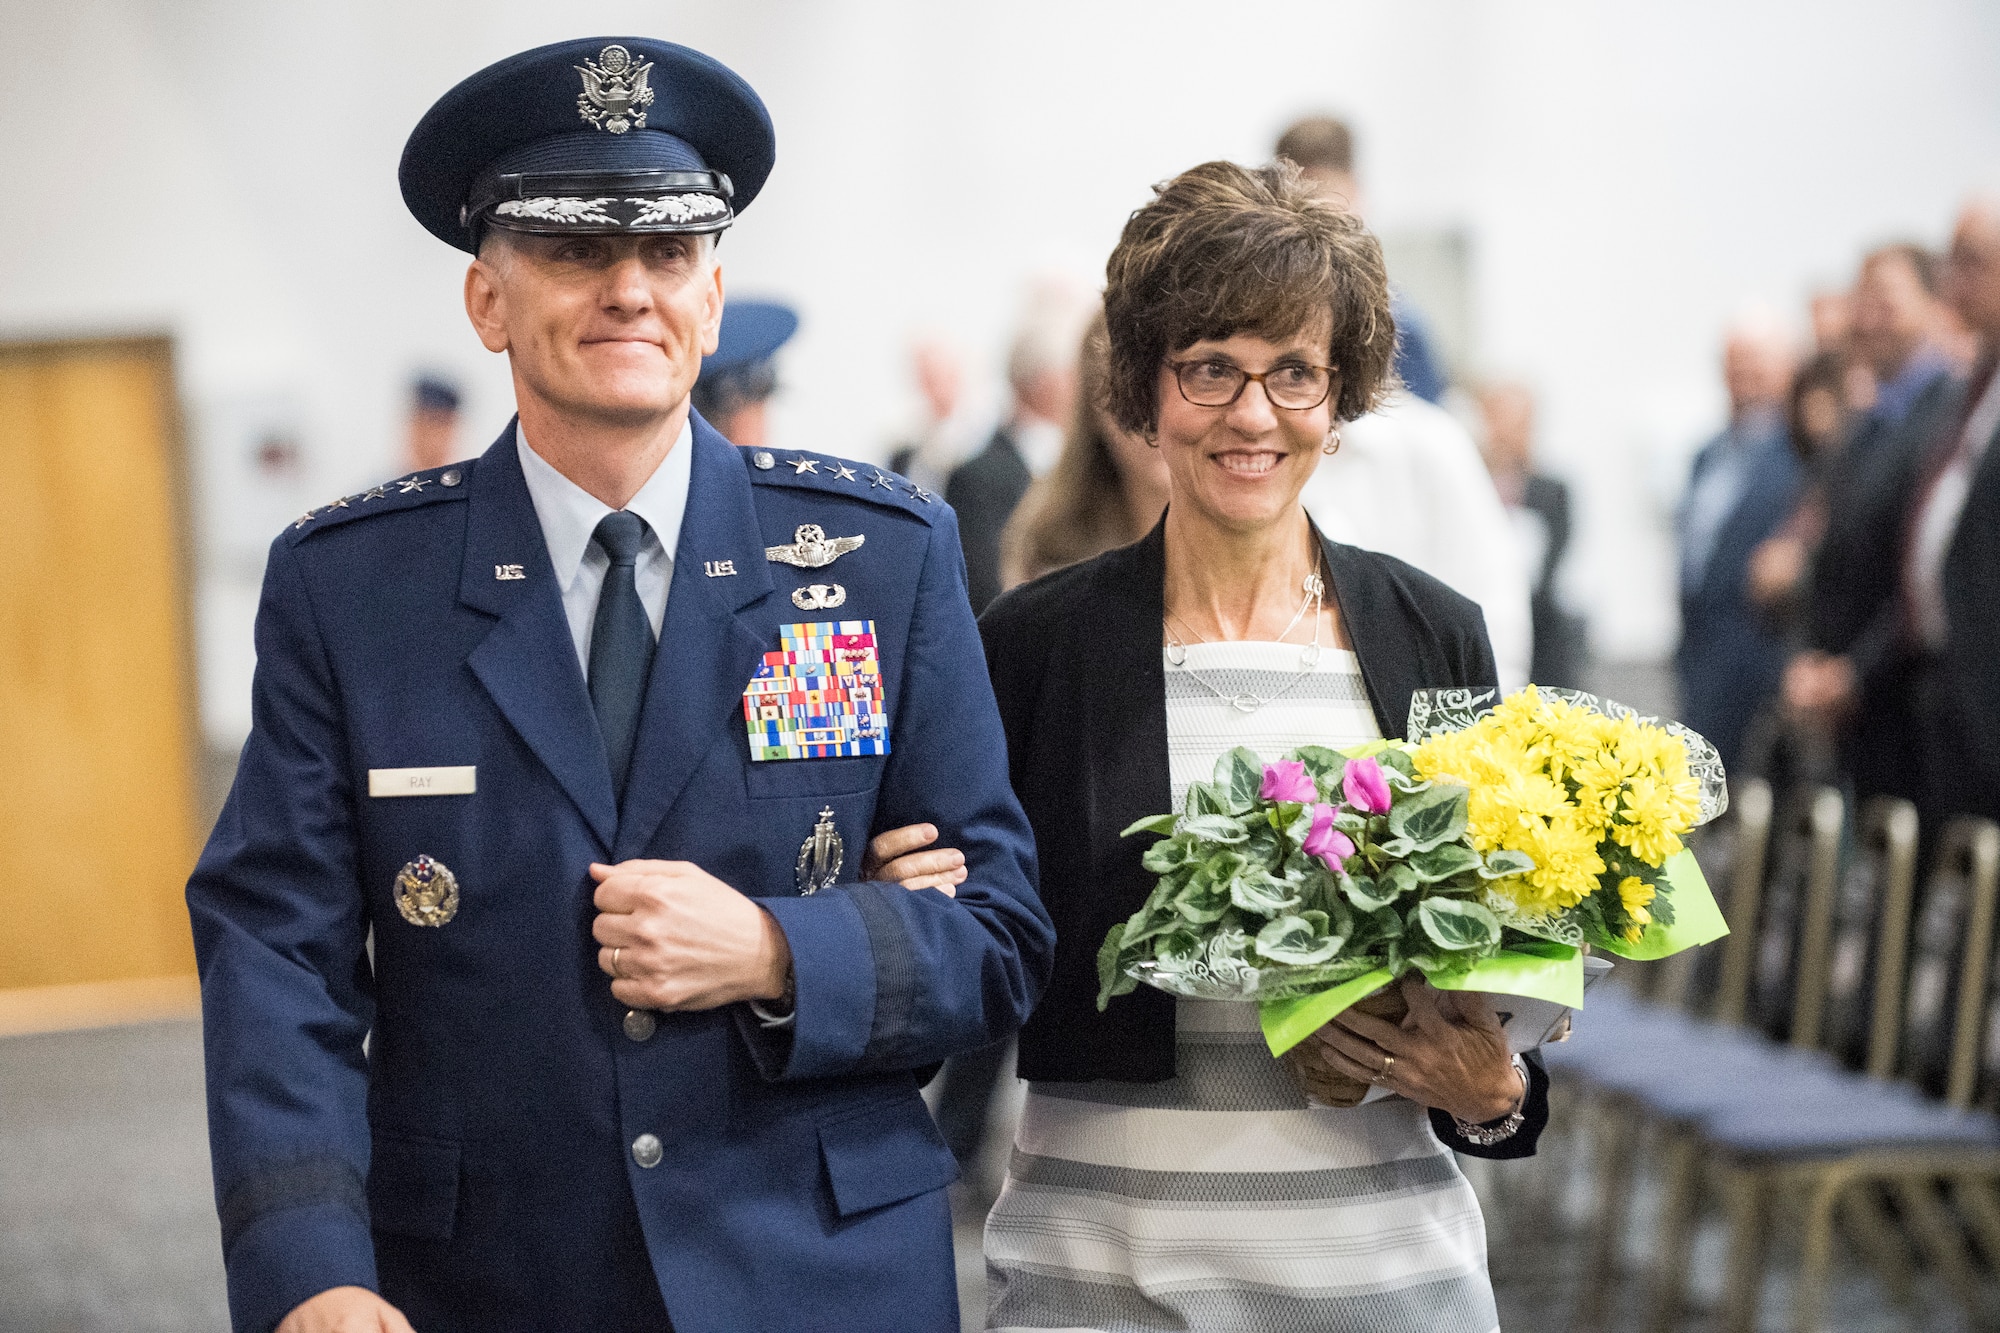 Gen. Timothy Ray, AFGSC commander, escorts his wife, Rhonda, during the Departure of the Official Party at the conclusion of Air Force Global Strike Command's change of command ceremony at Barksdale Air Force Base, La., Aug. 21, 2018.